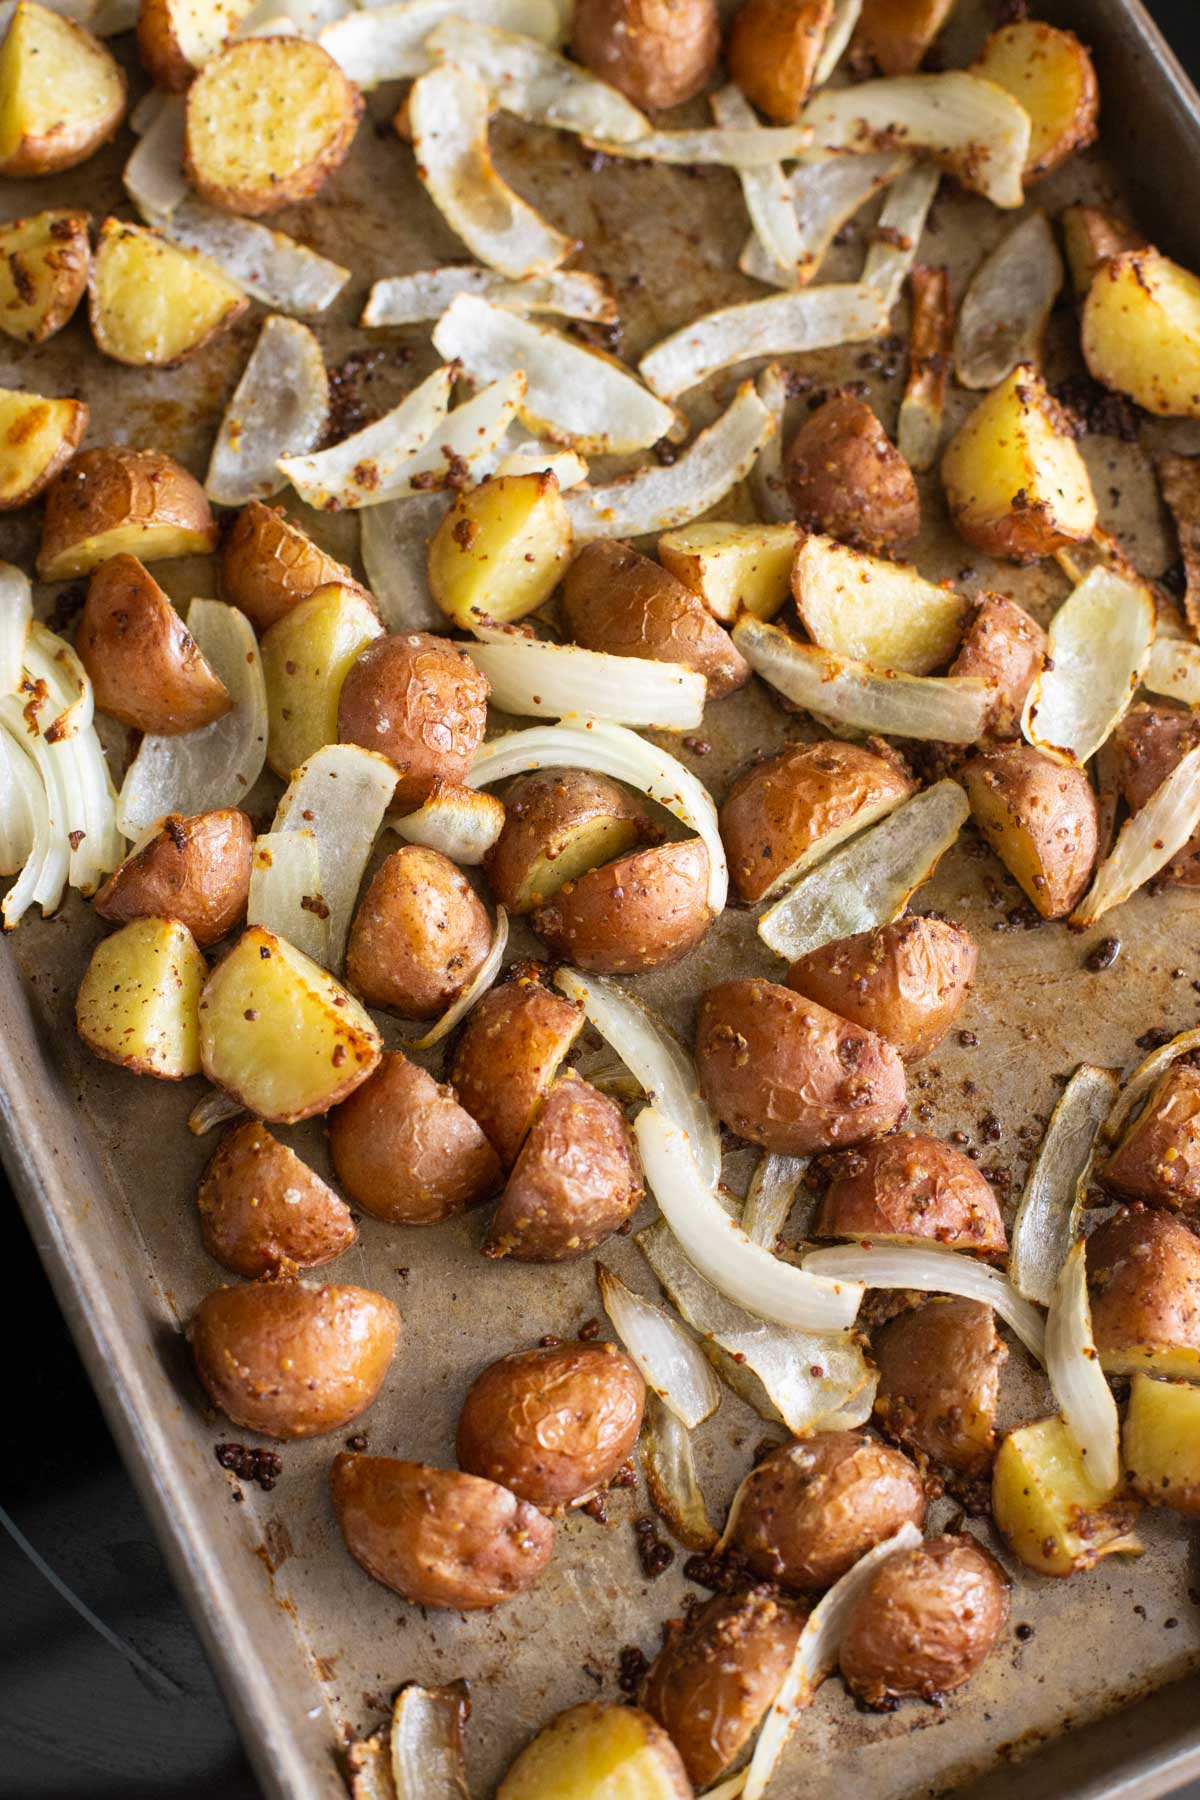 The roasted potatoes on the baking sheet out of the oven.